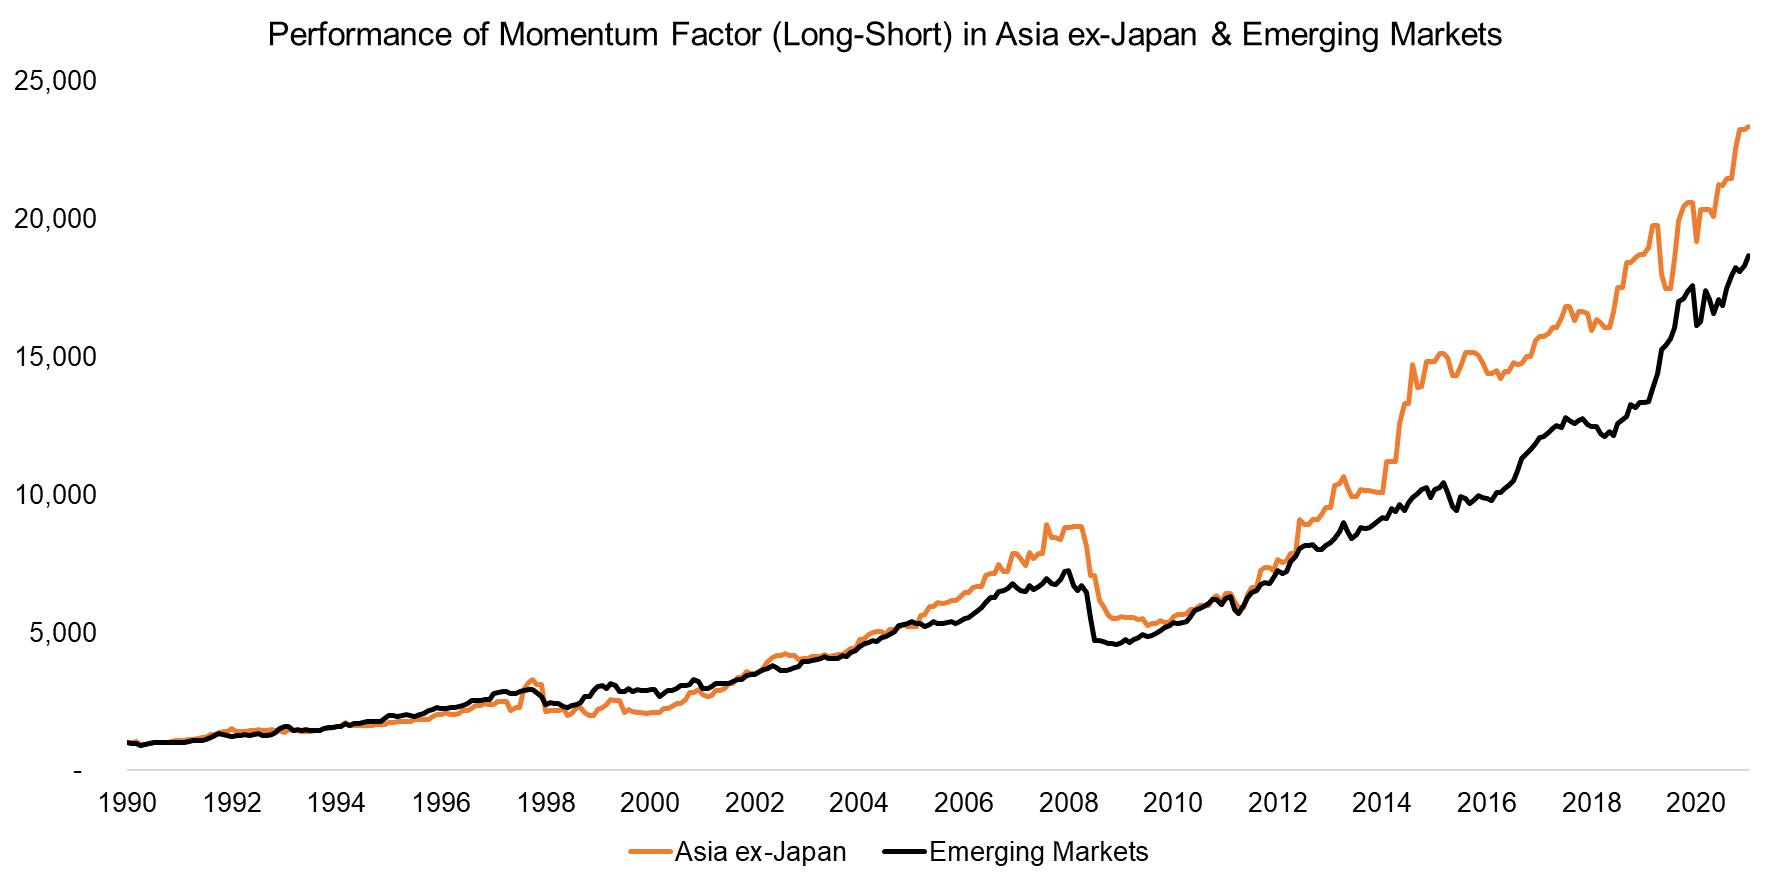 Performance of Momentum Factor (Long-Short) in Asia ex-Japan & Emerging Markets